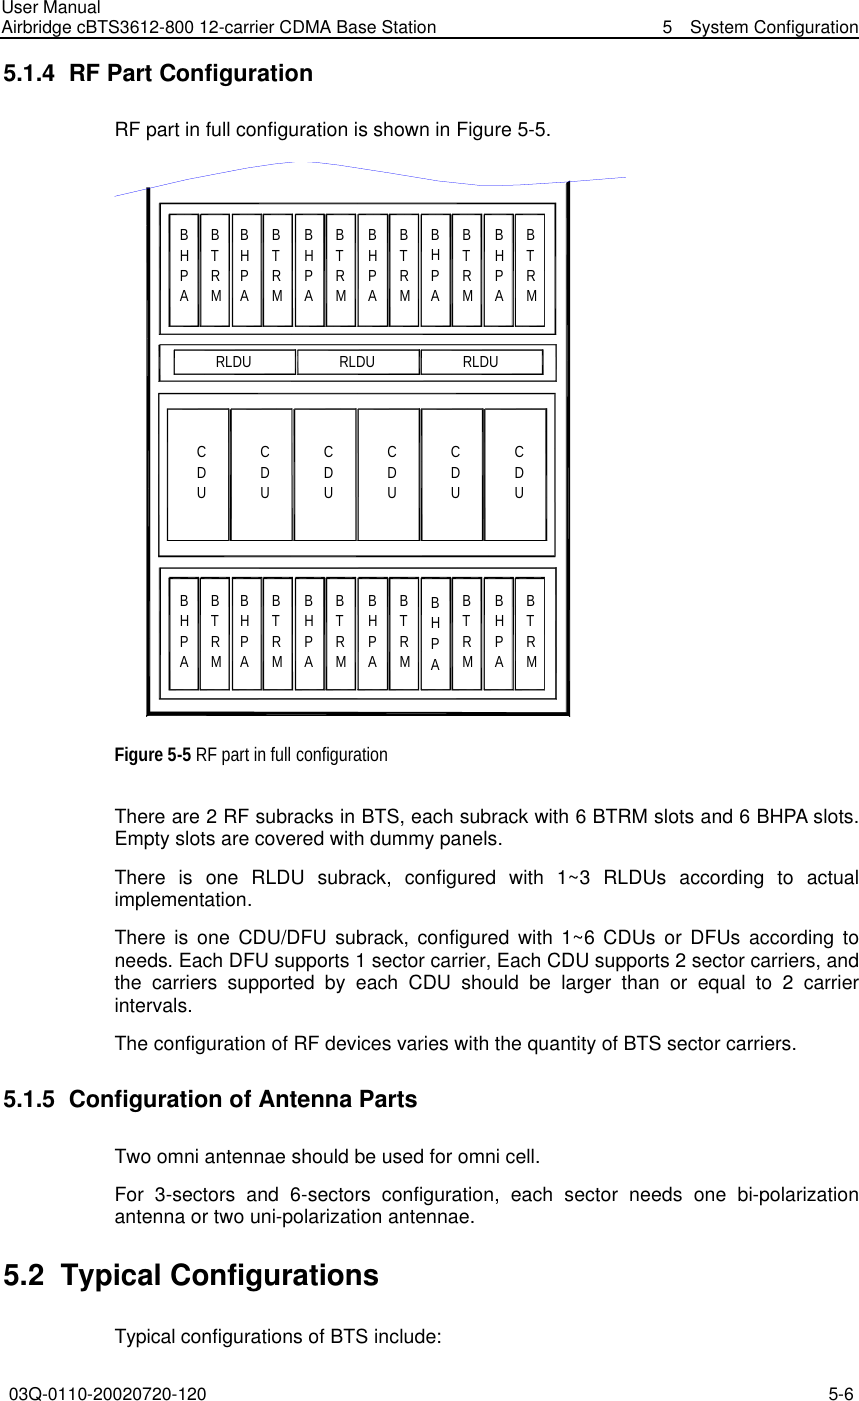 User Manual Airbridge cBTS3612-800 12-carrier CDMA Base Station   5  System Configuration 03Q-0110-20020720-120 5-6  5.1.4  RF Part Configuration RF part in full configuration is shown in Figure 5-5.   BHPABTRMRLDUCDURLDU RLDUCDUCDUCDUCDUCDUBHPABTRMBHPABTRMBHPABTRMBHPABTRMBHPABTRMBHPABTRMBHPABTRMBHPABTRMBHPABTRMBHPABTRMBHPABTRM Figure 5-5 RF part in full configuration There are 2 RF subracks in BTS, each subrack with 6 BTRM slots and 6 BHPA slots. Empty slots are covered with dummy panels.   There is one RLDU subrack,  configured with 1~3 RLDUs according to actual implementation.   There is one CDU/DFU subrack, configured with 1~6 CDUs or DFUs according to needs. Each DFU supports 1 sector carrier, Each CDU supports 2 sector carriers, and the carriers supported by each CDU should be larger than or equal to 2 carrier intervals. The configuration of RF devices varies with the quantity of BTS sector carriers. 5.1.5  Configuration of Antenna Parts Two omni antennae should be used for omni cell.   For 3-sectors and 6-sectors configuration, each sector needs one bi-polarization antenna or two uni-polarization antennae. 5.2  Typical Configurations Typical configurations of BTS include:   